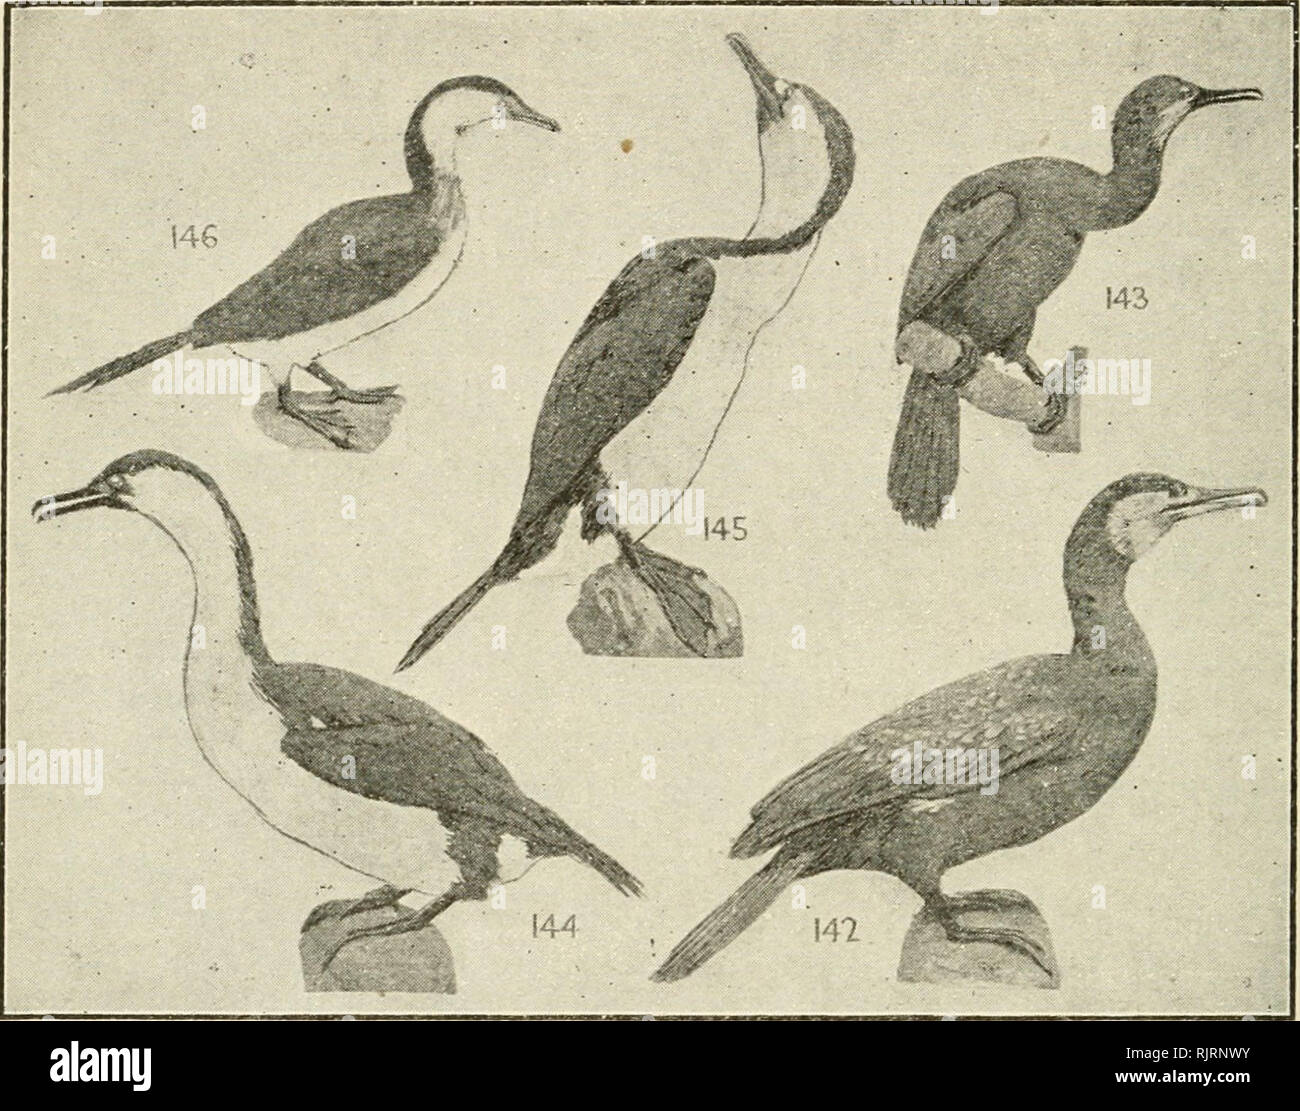 . An Australian bird book : a pocket book for field use. Birds -- Australia Identification. 68 AN AUSTRALIAN BIRD BOOK.. ORDER XIV.—PELICANIFORIMES. F. 59. PHALACROCORACIDAE (5), CORMORANTS, 42 sp. —16(14)A., 6(2)0., 7(3)P., 6(5)E., 10(4)Nc., 9(6)N1. 5 142 Cormorant, (Black), Black Shag, PTia/acrocoraic carbo. 42 A., T,, N.Z., COS. exc. S. Am. c. lagoons, sea 35 Glossy blackish-green; side of neck, face buffy white; white oil thighs; f., sim. Fish. being free. Representatives of the six families are found in Aus- tralia. These birds are fishers par excellence. In the first family come the well Stock Photo